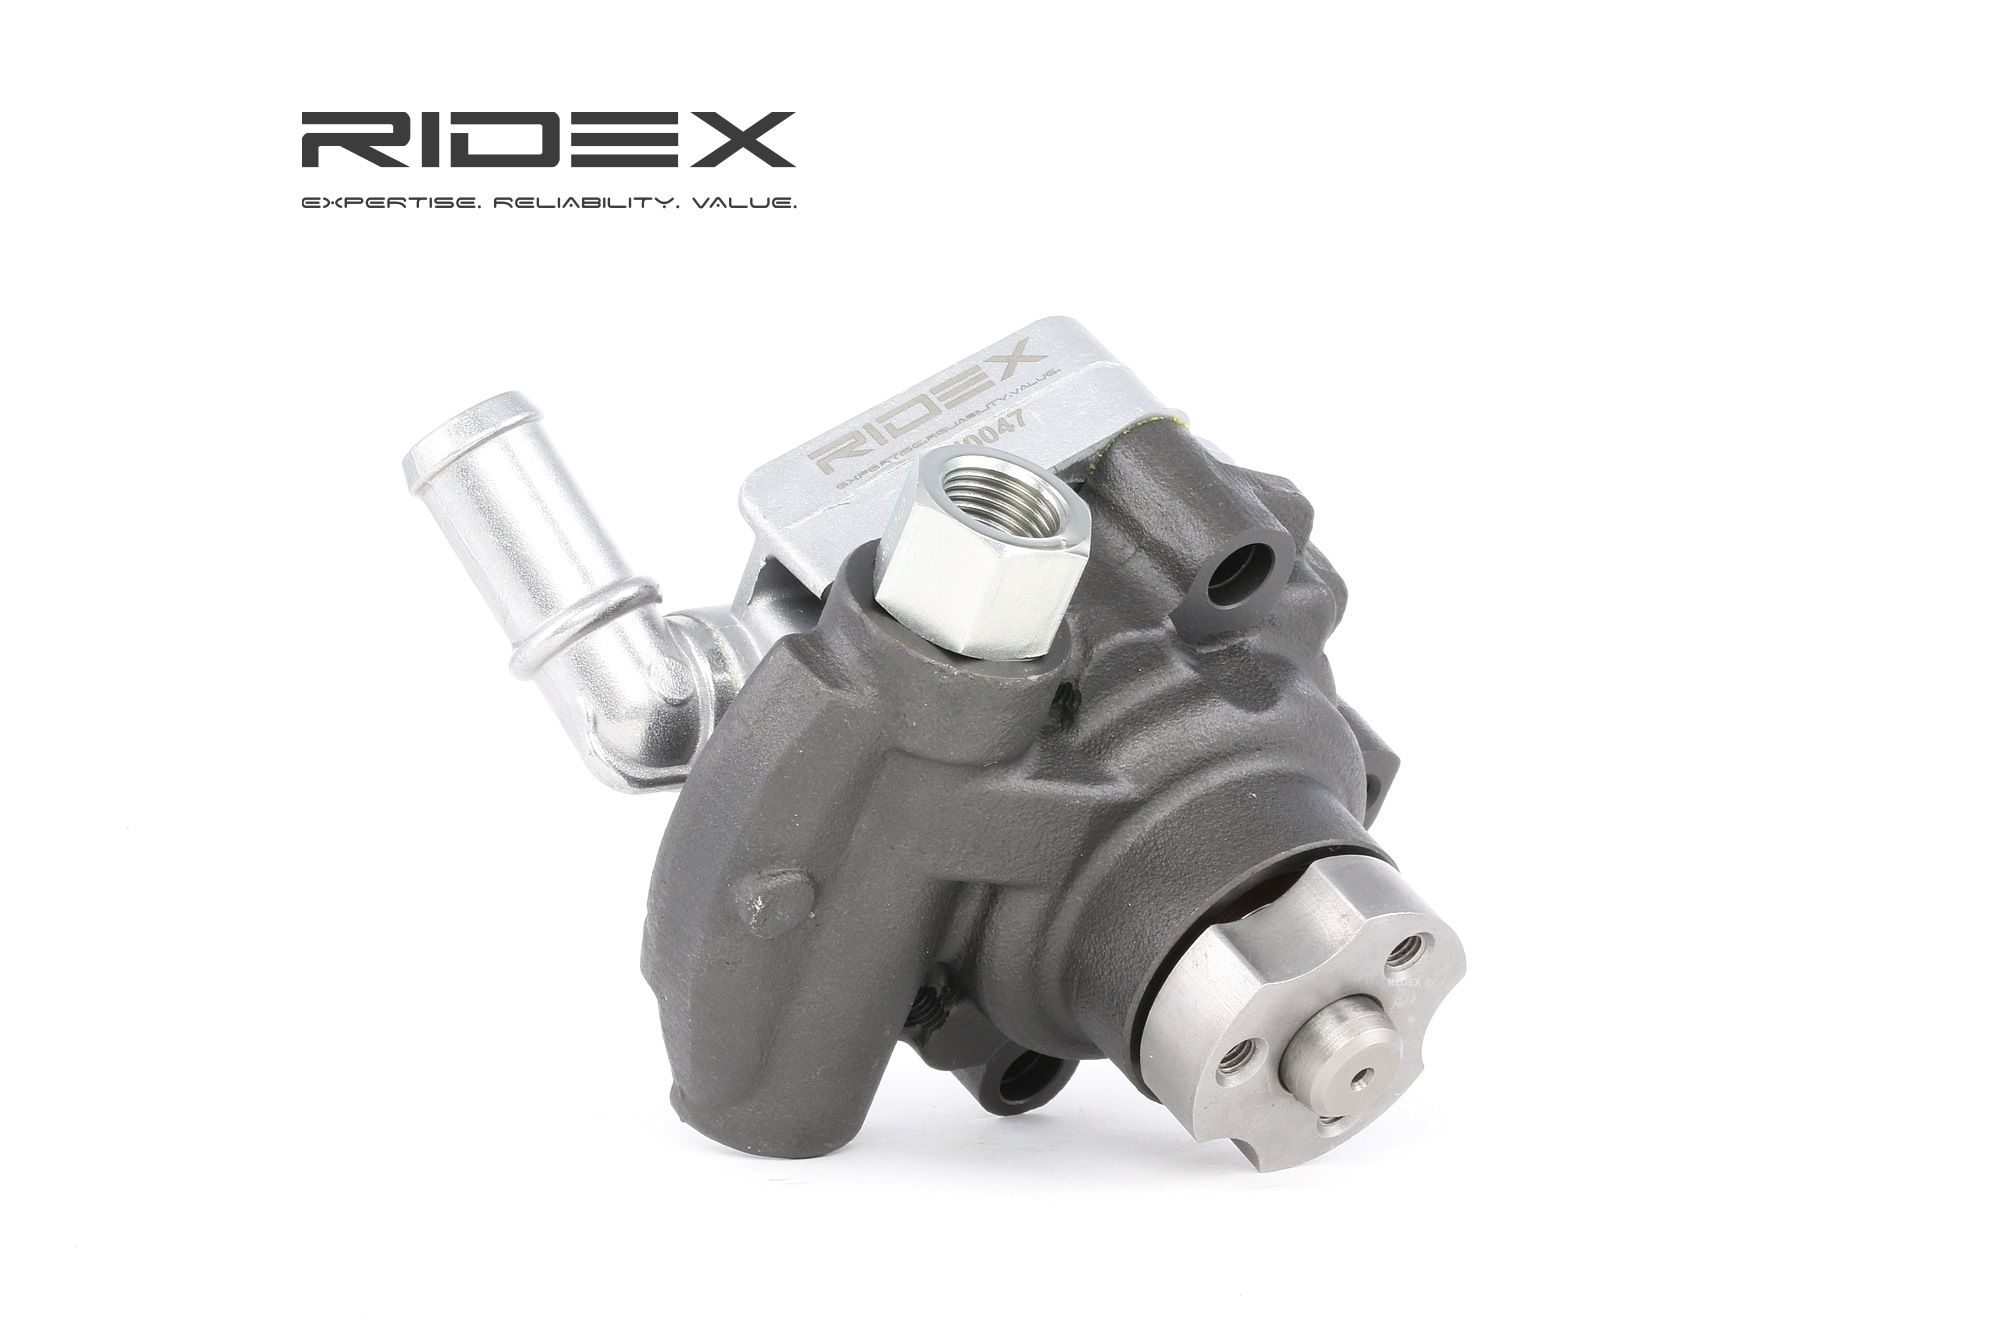 Image of RIDEX Power Steering Pump FORD 12H0047 1117631,1357629,1475652 Steering Pump,EHPS,EHPS Pump,Hydraulic Pump, steering system 1C153A674AB,1C153A674AD